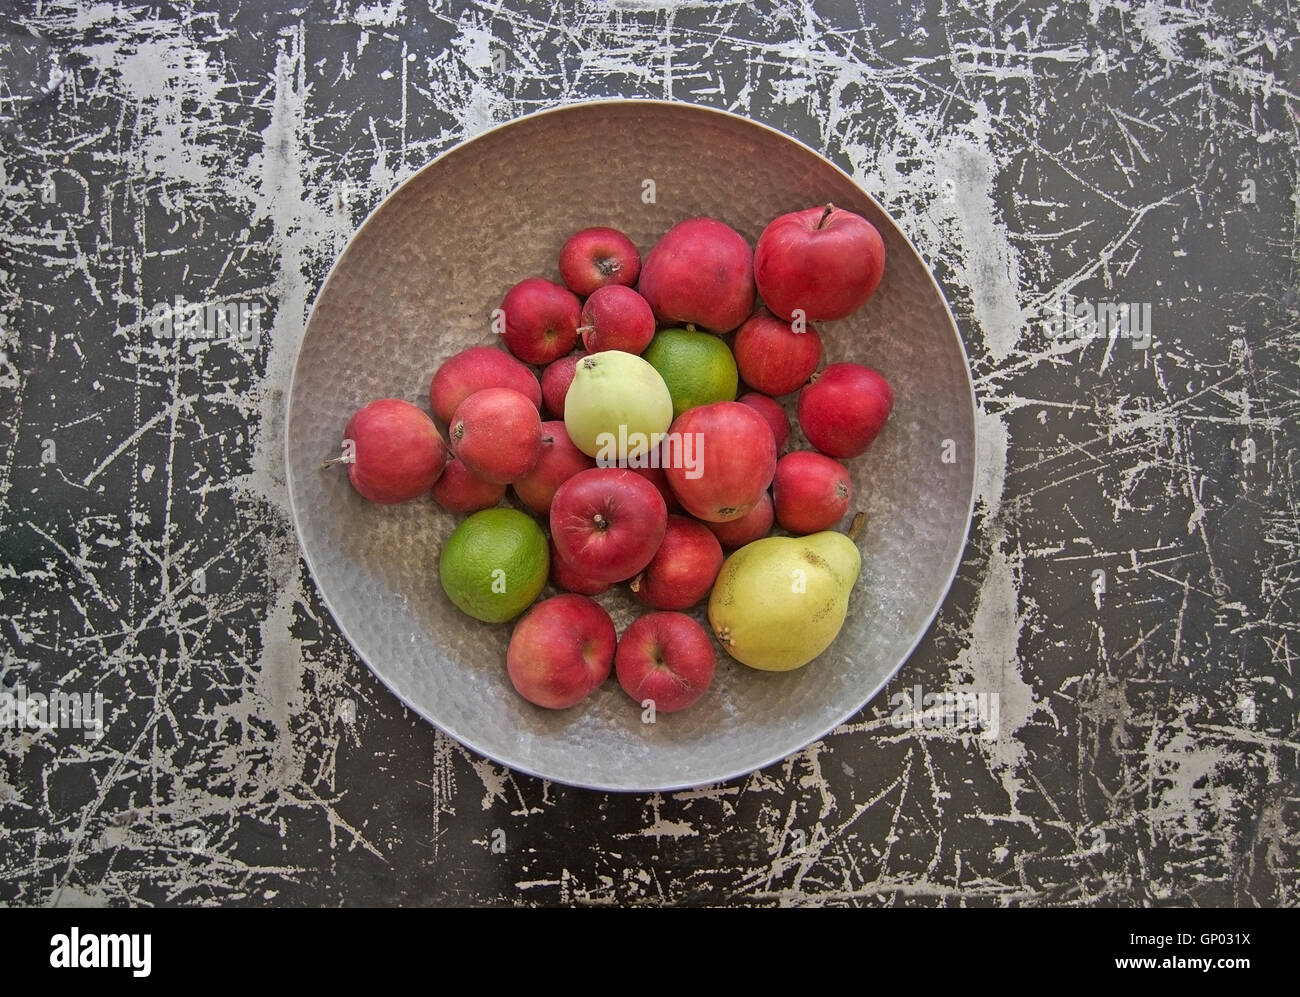 Silver color metal bowl with red apples, a pear and lime fruits on black and silver colored metal surface. Stock Photo